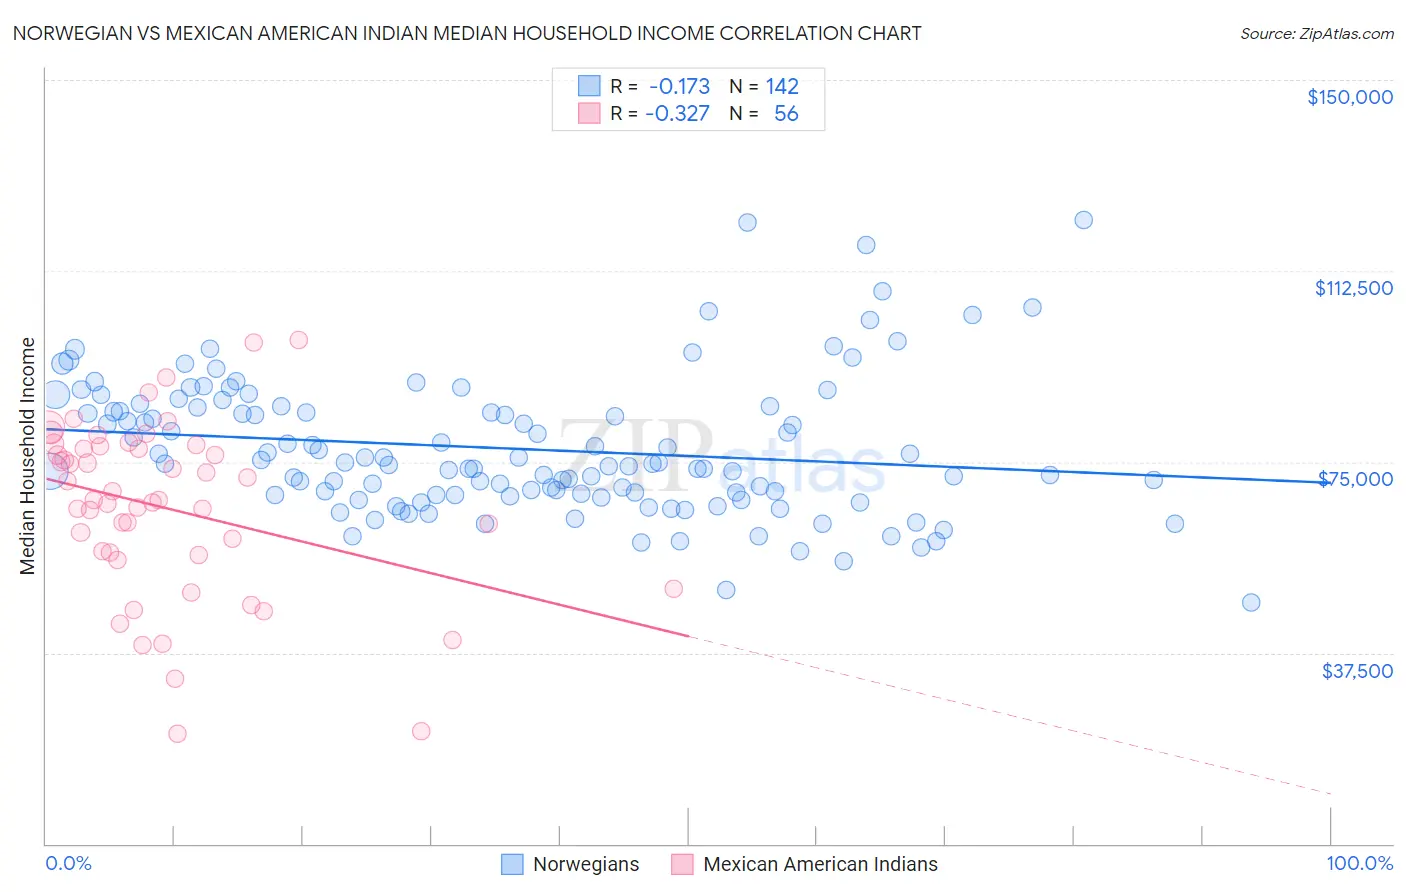 Norwegian vs Mexican American Indian Median Household Income